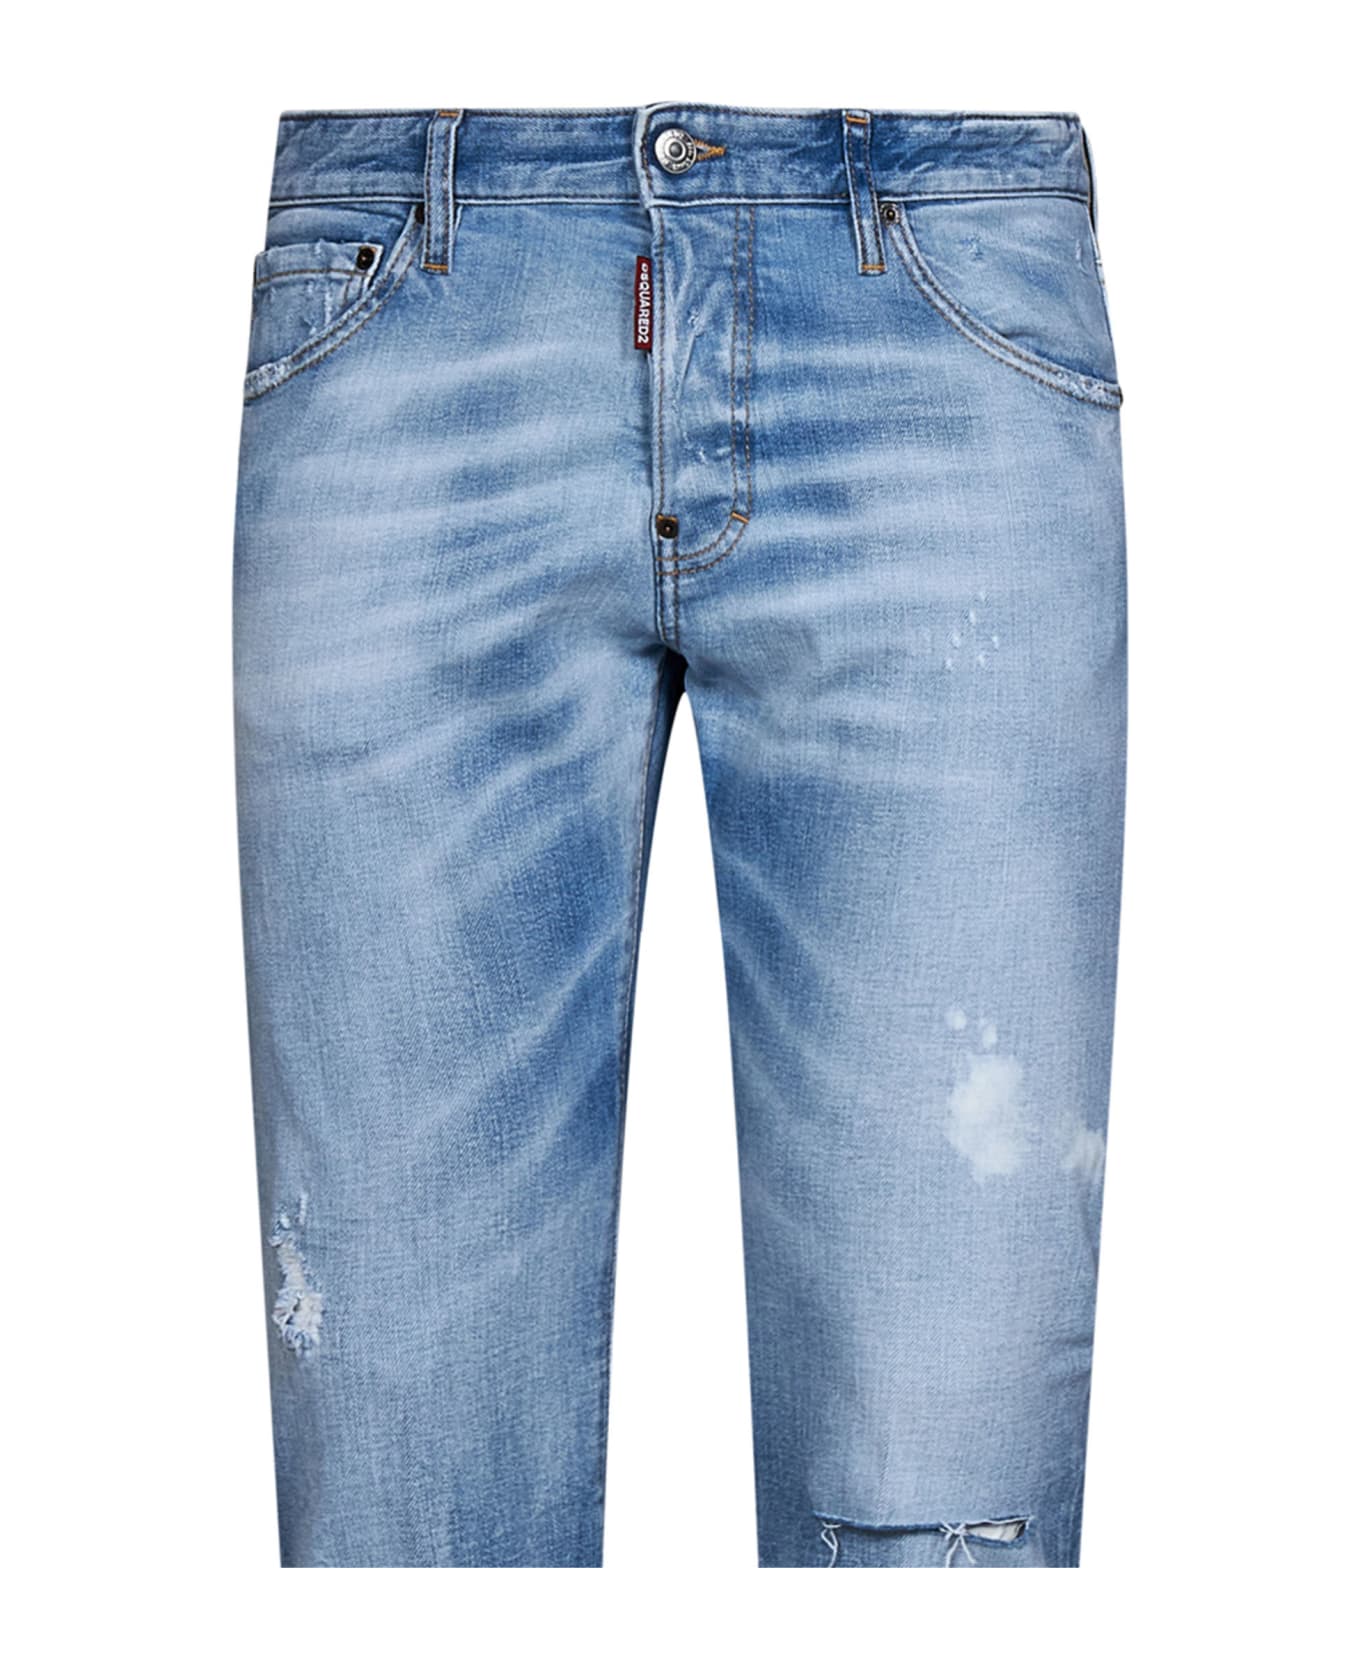 Dsquared2 Cool Guy Jeans - Blue ボトムス